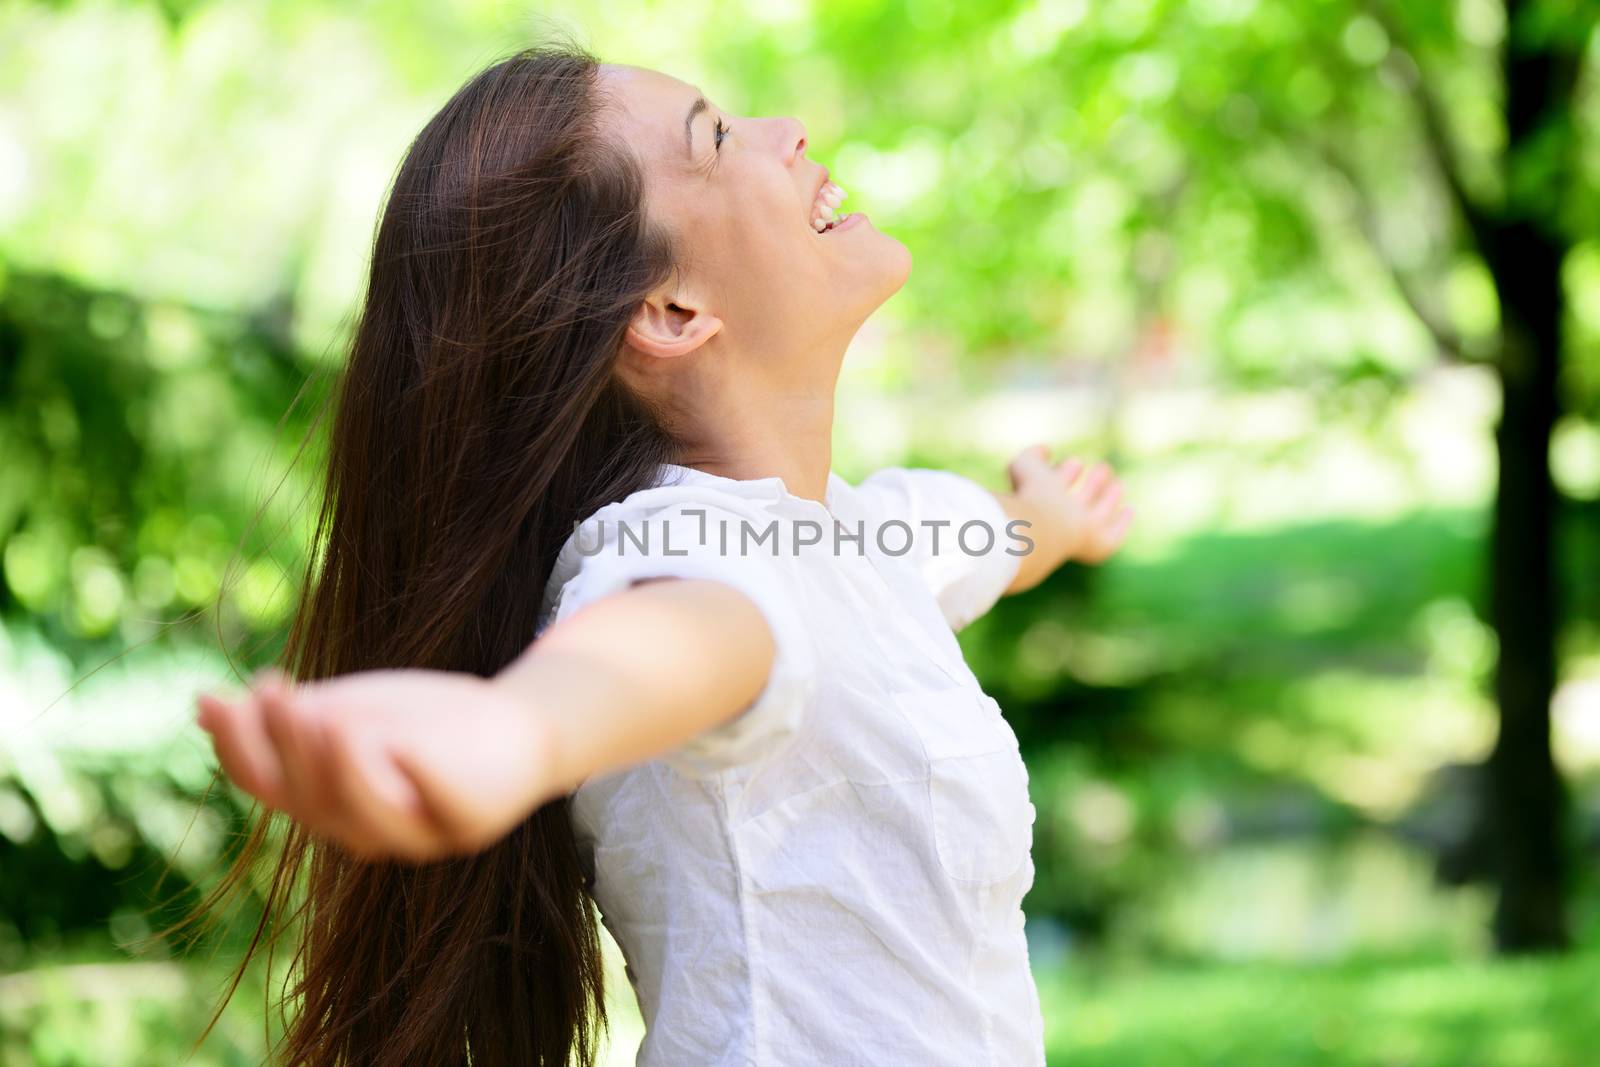 Joyful Woman With Arms Outstretched In Park by Maridav